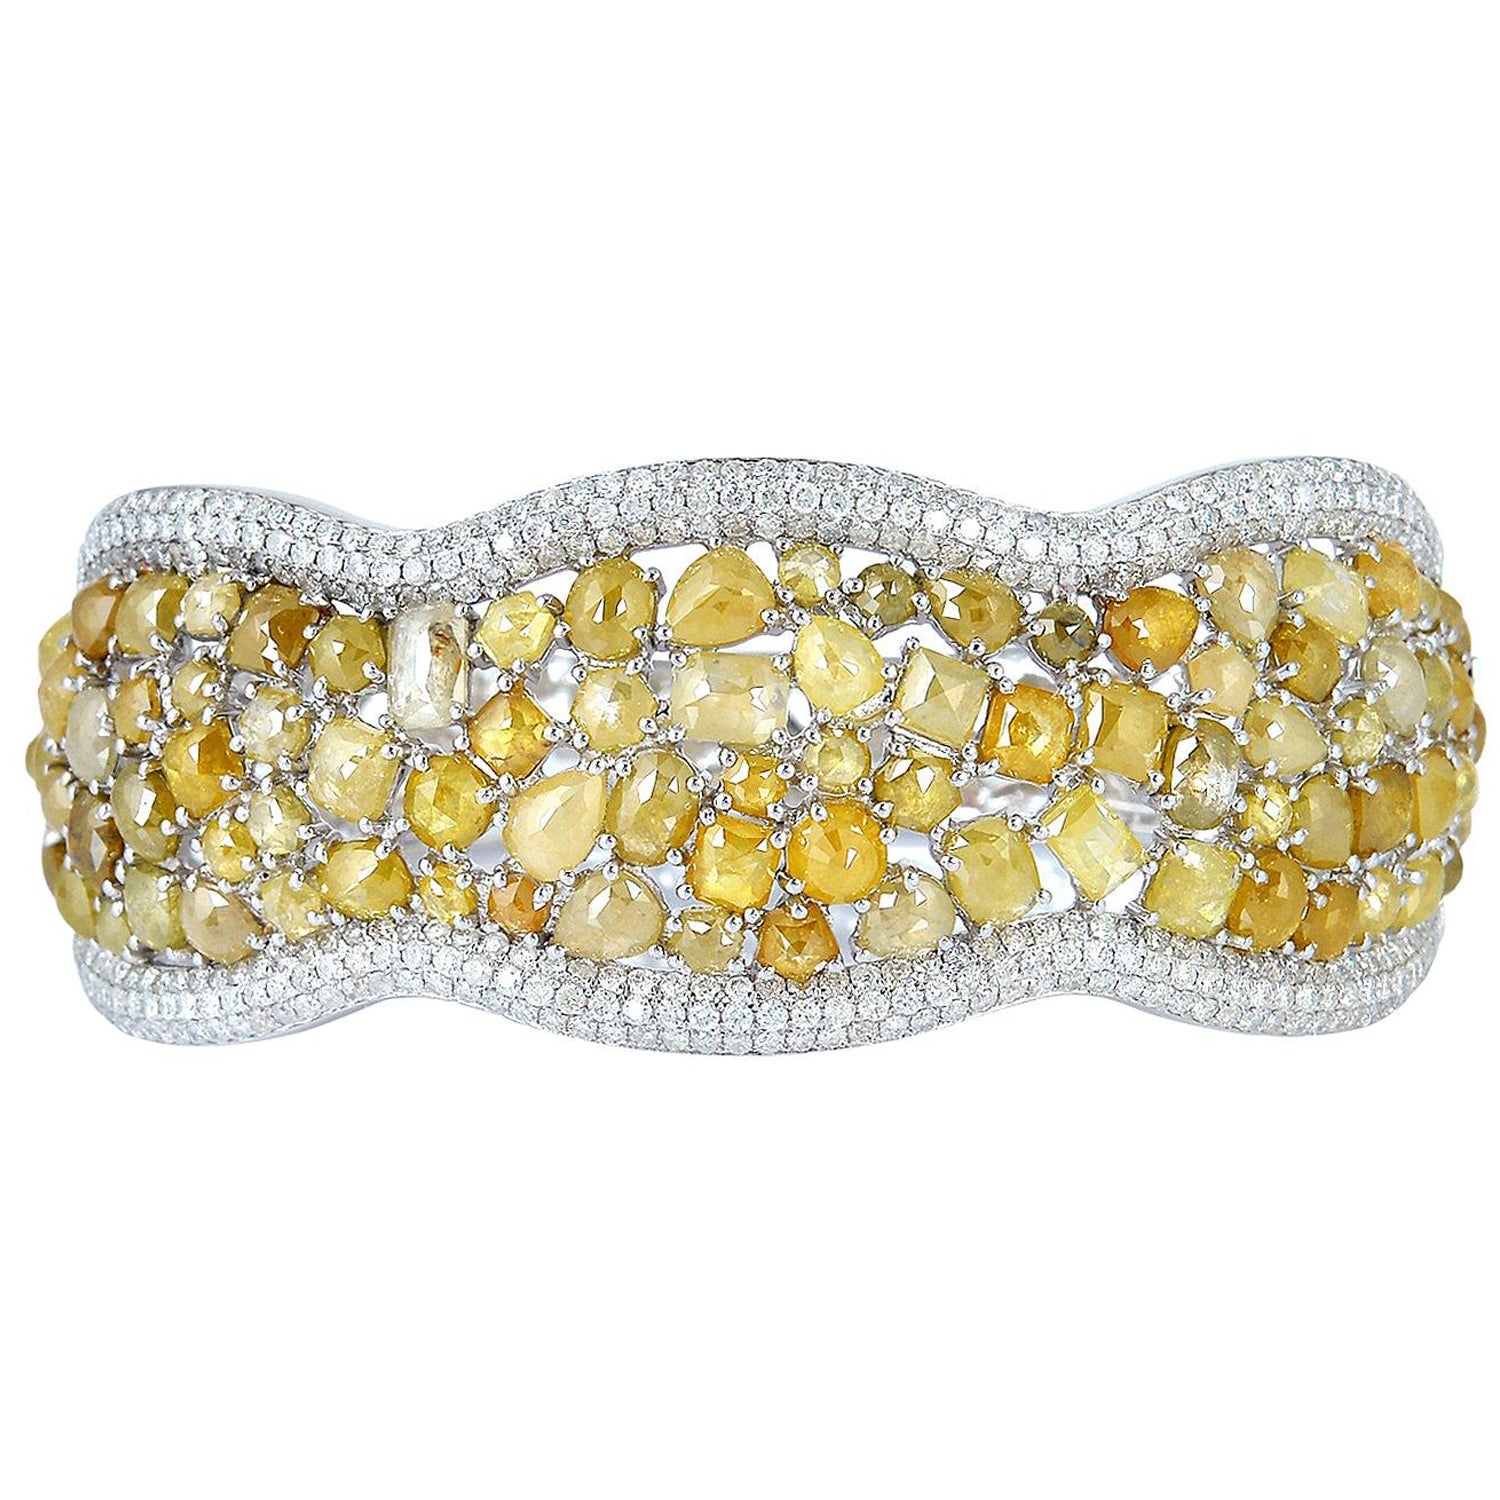 24.83ct Yellow Ice Diamond and White Diamond Bangle Set Made in 18K White Gold For Sale